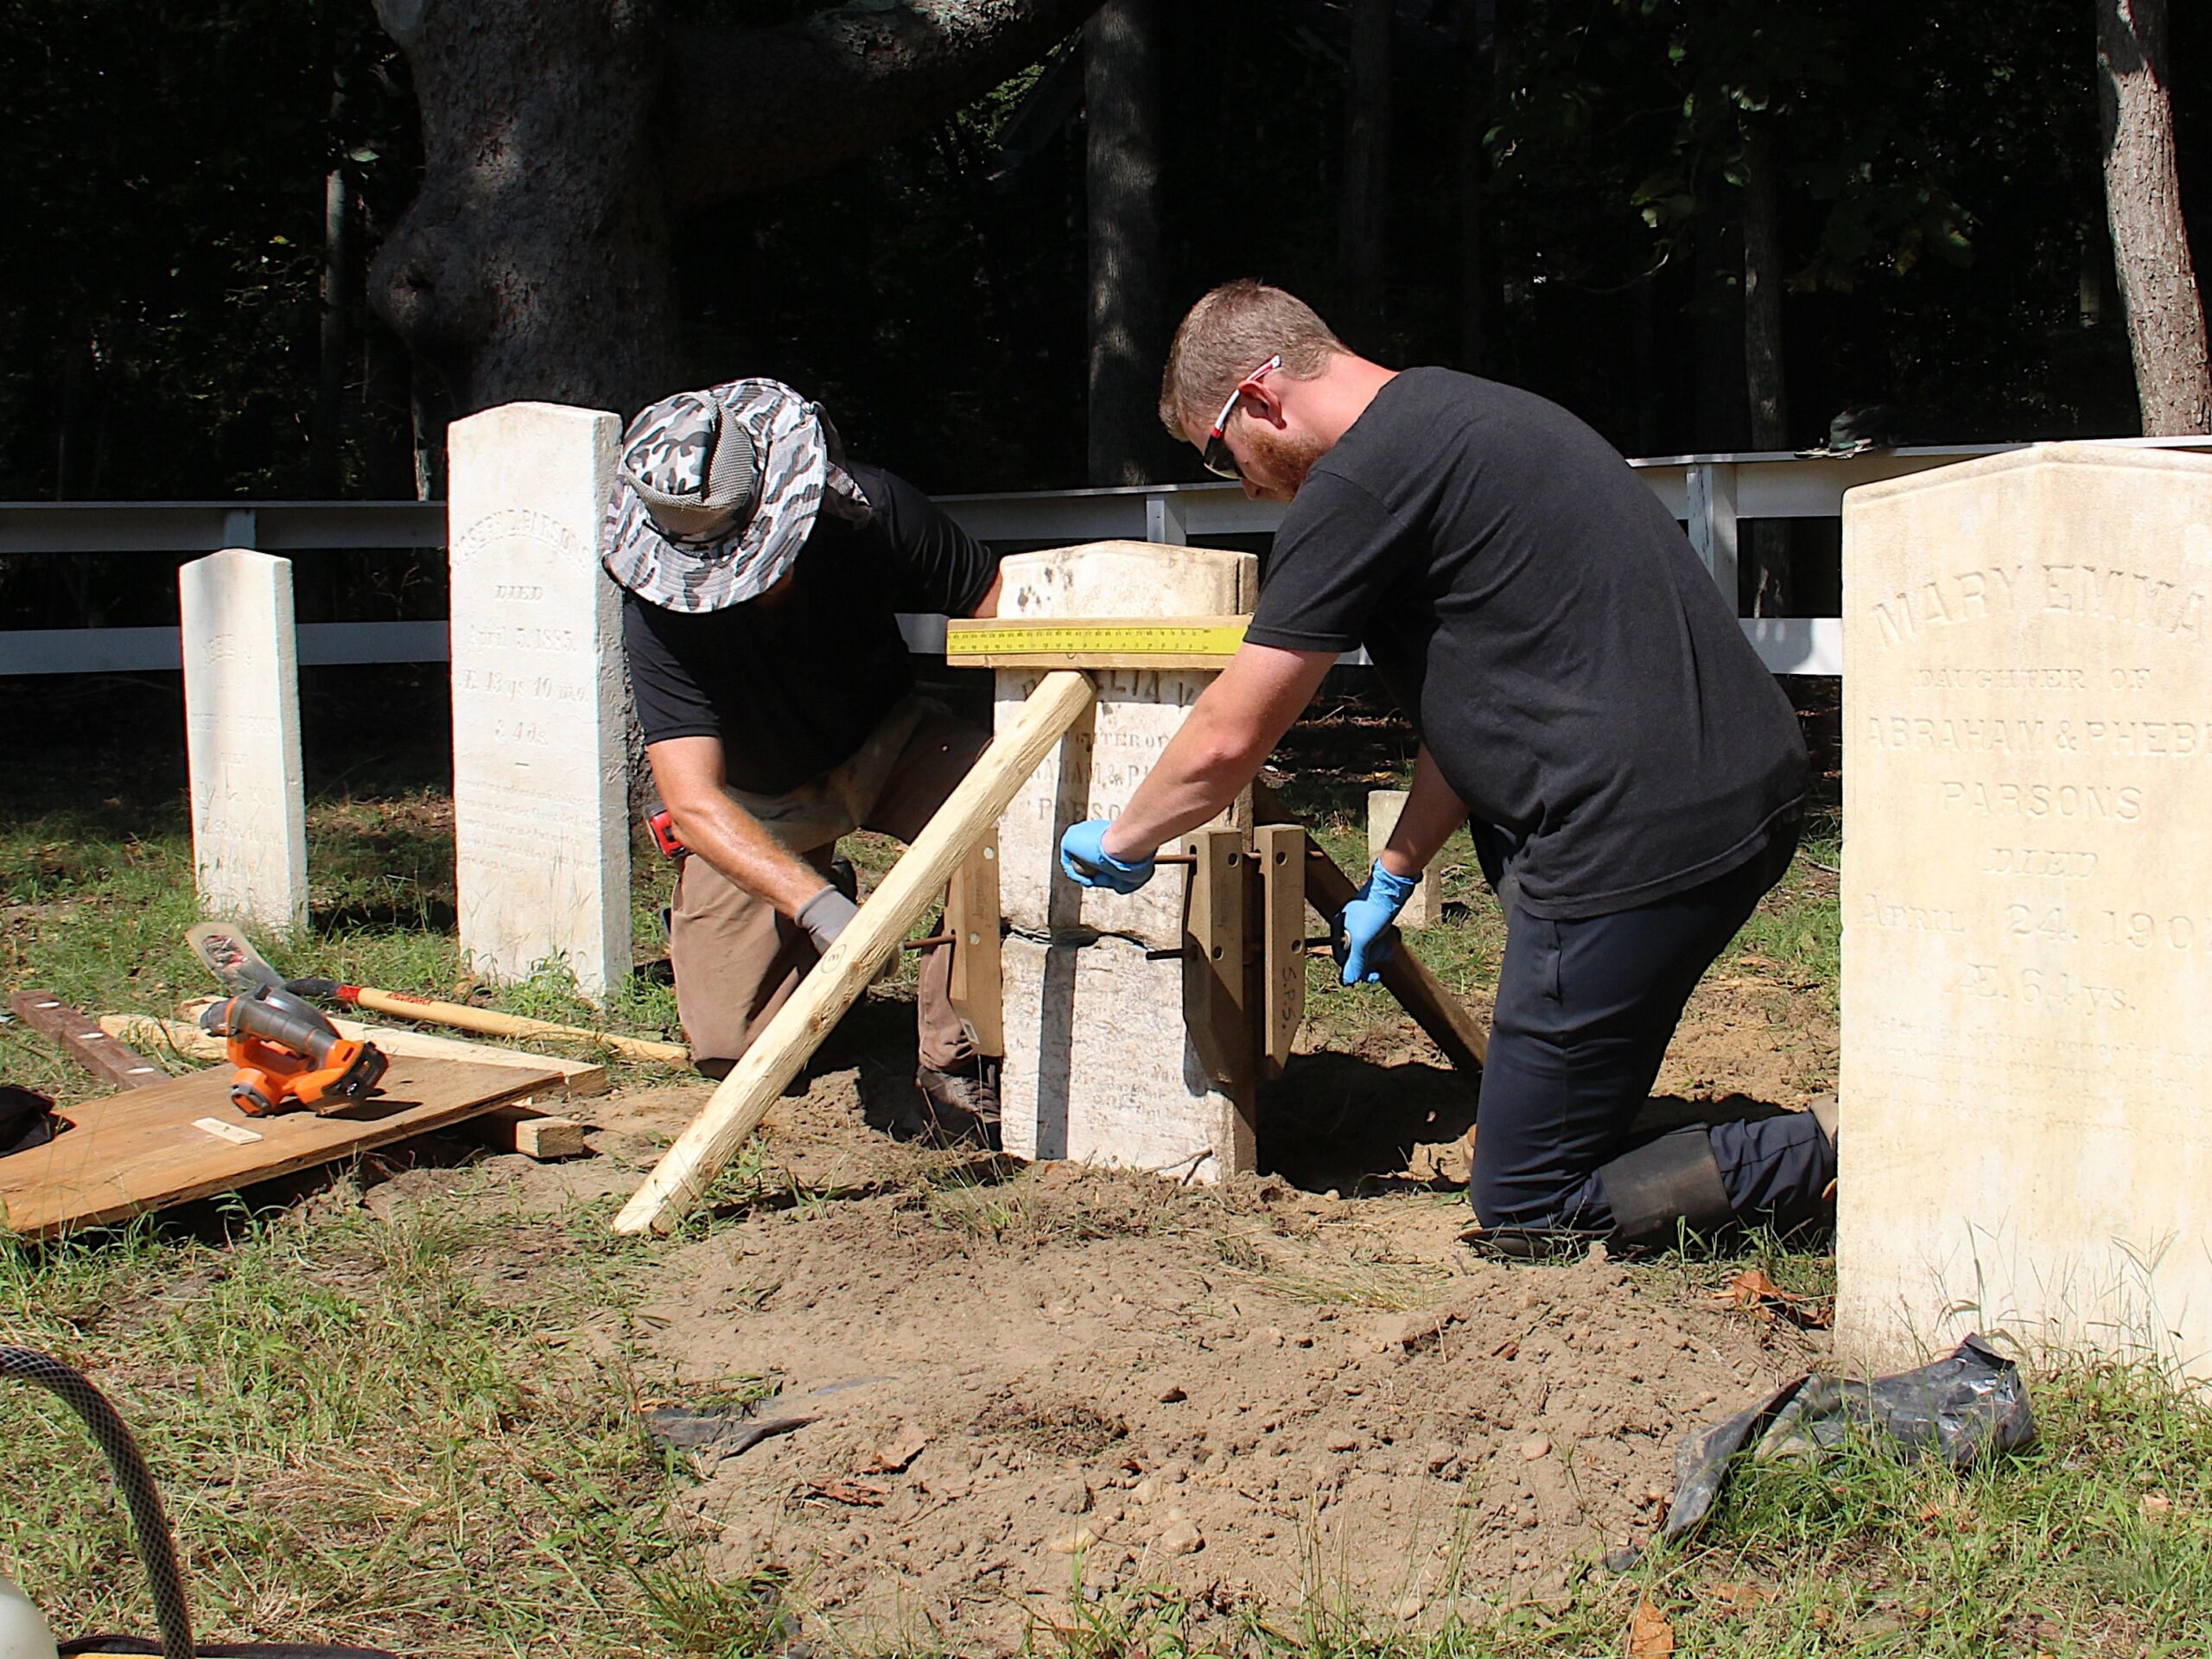 Joel Snodgrass and his son Kole restored gravestones in the Hog Creek Cemetery, including one of a 20-month old baby named Easter Persons who died just two days before Christmas in 1782.